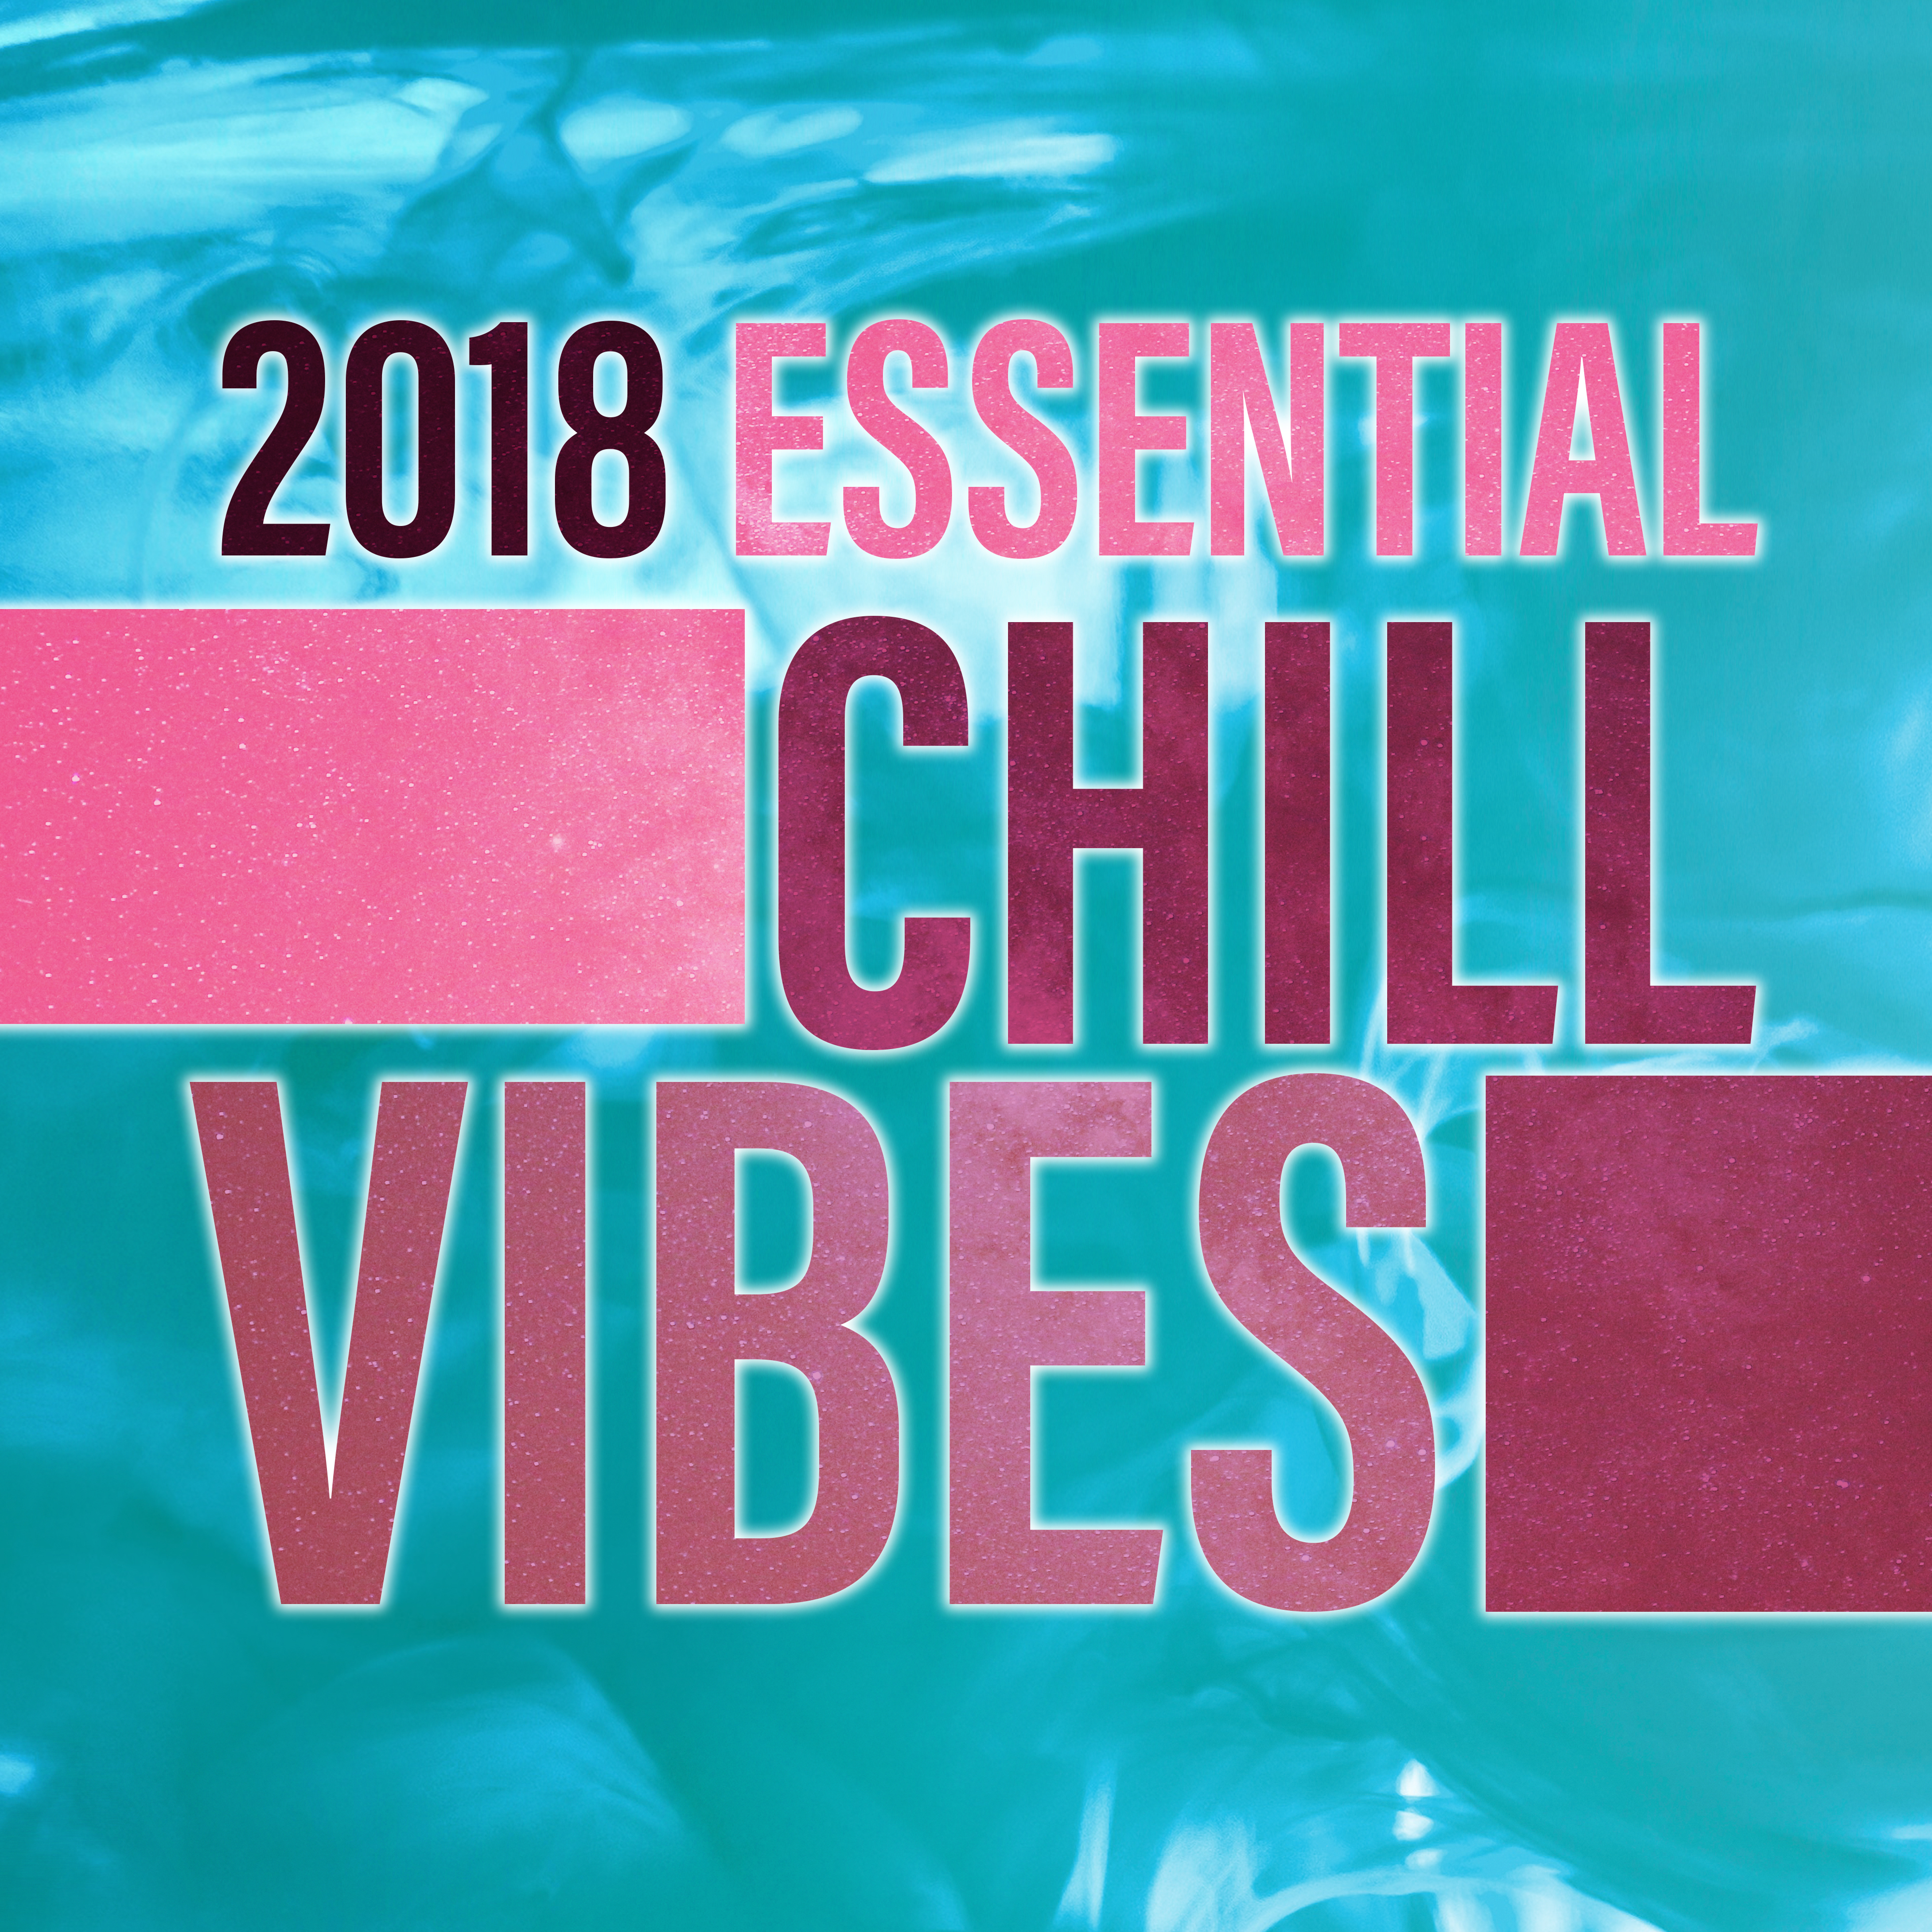 2018 Essential Chill Vibes